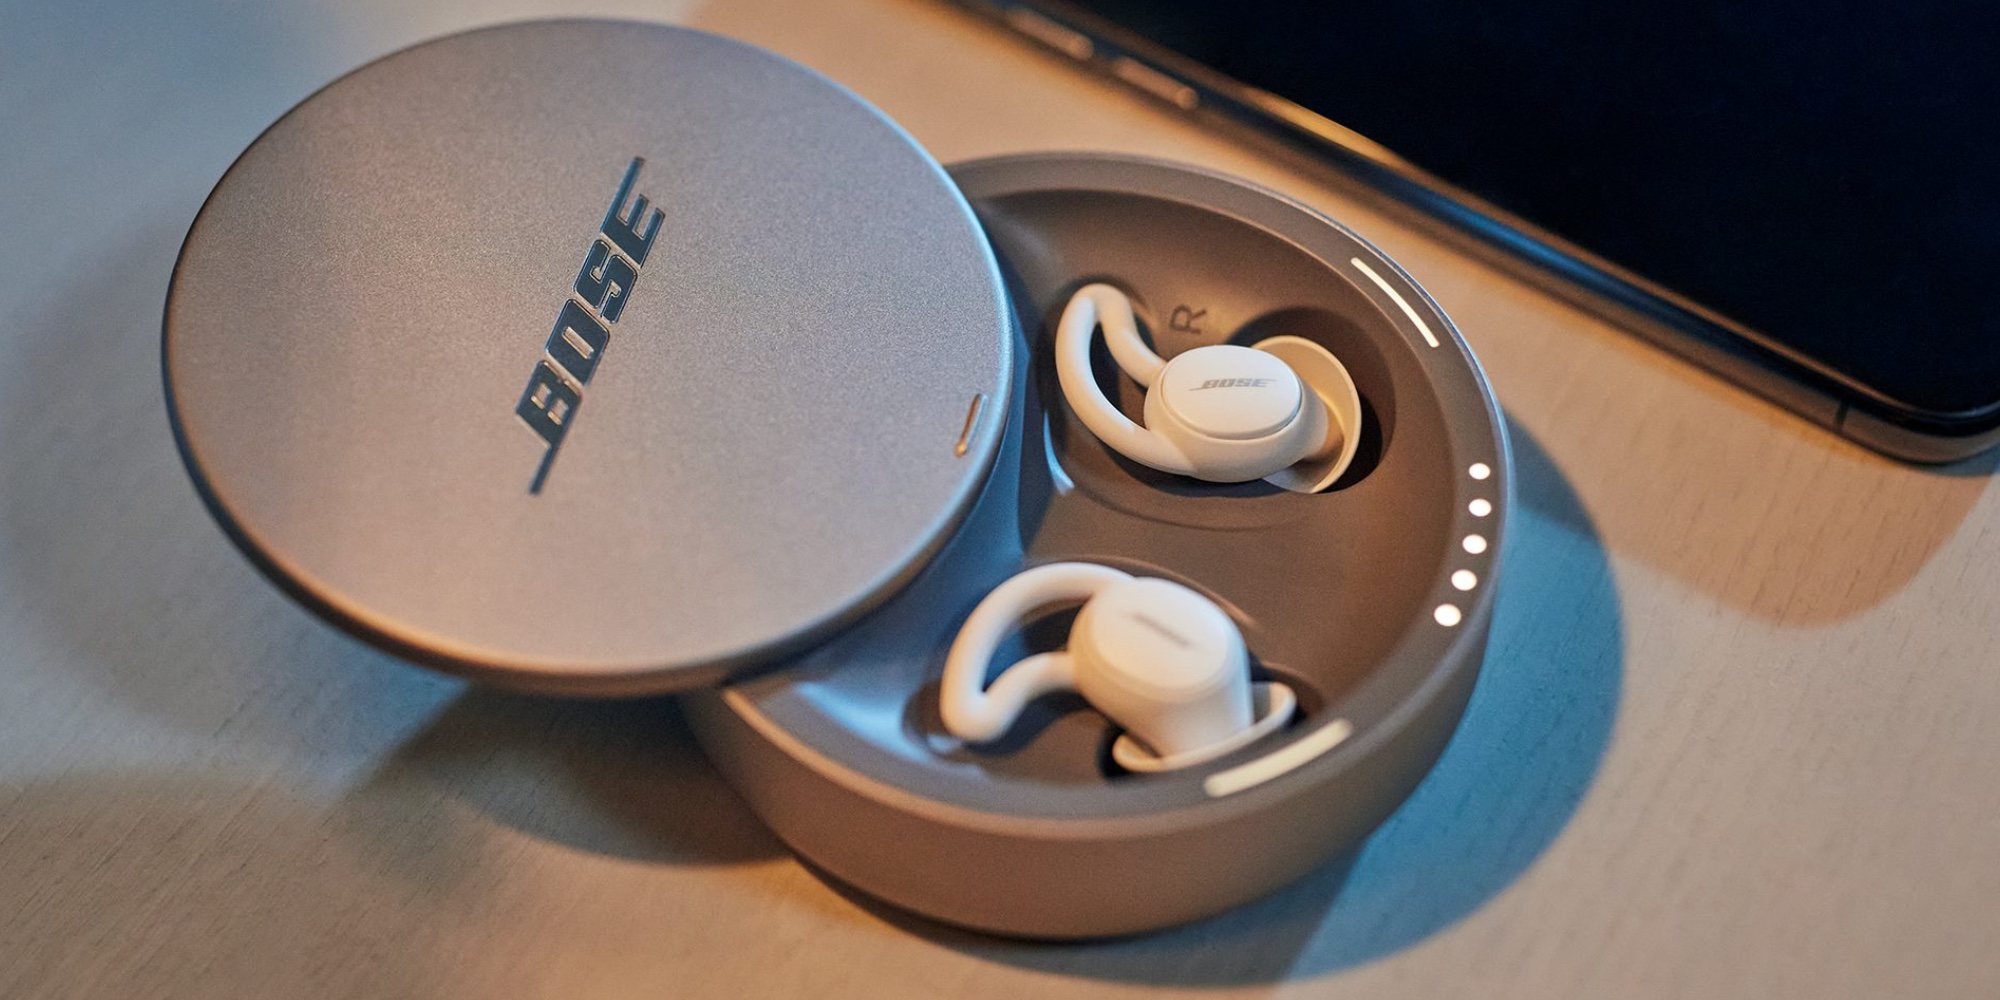 Bose Sleepbuds II hit one of the best prices ever at $139